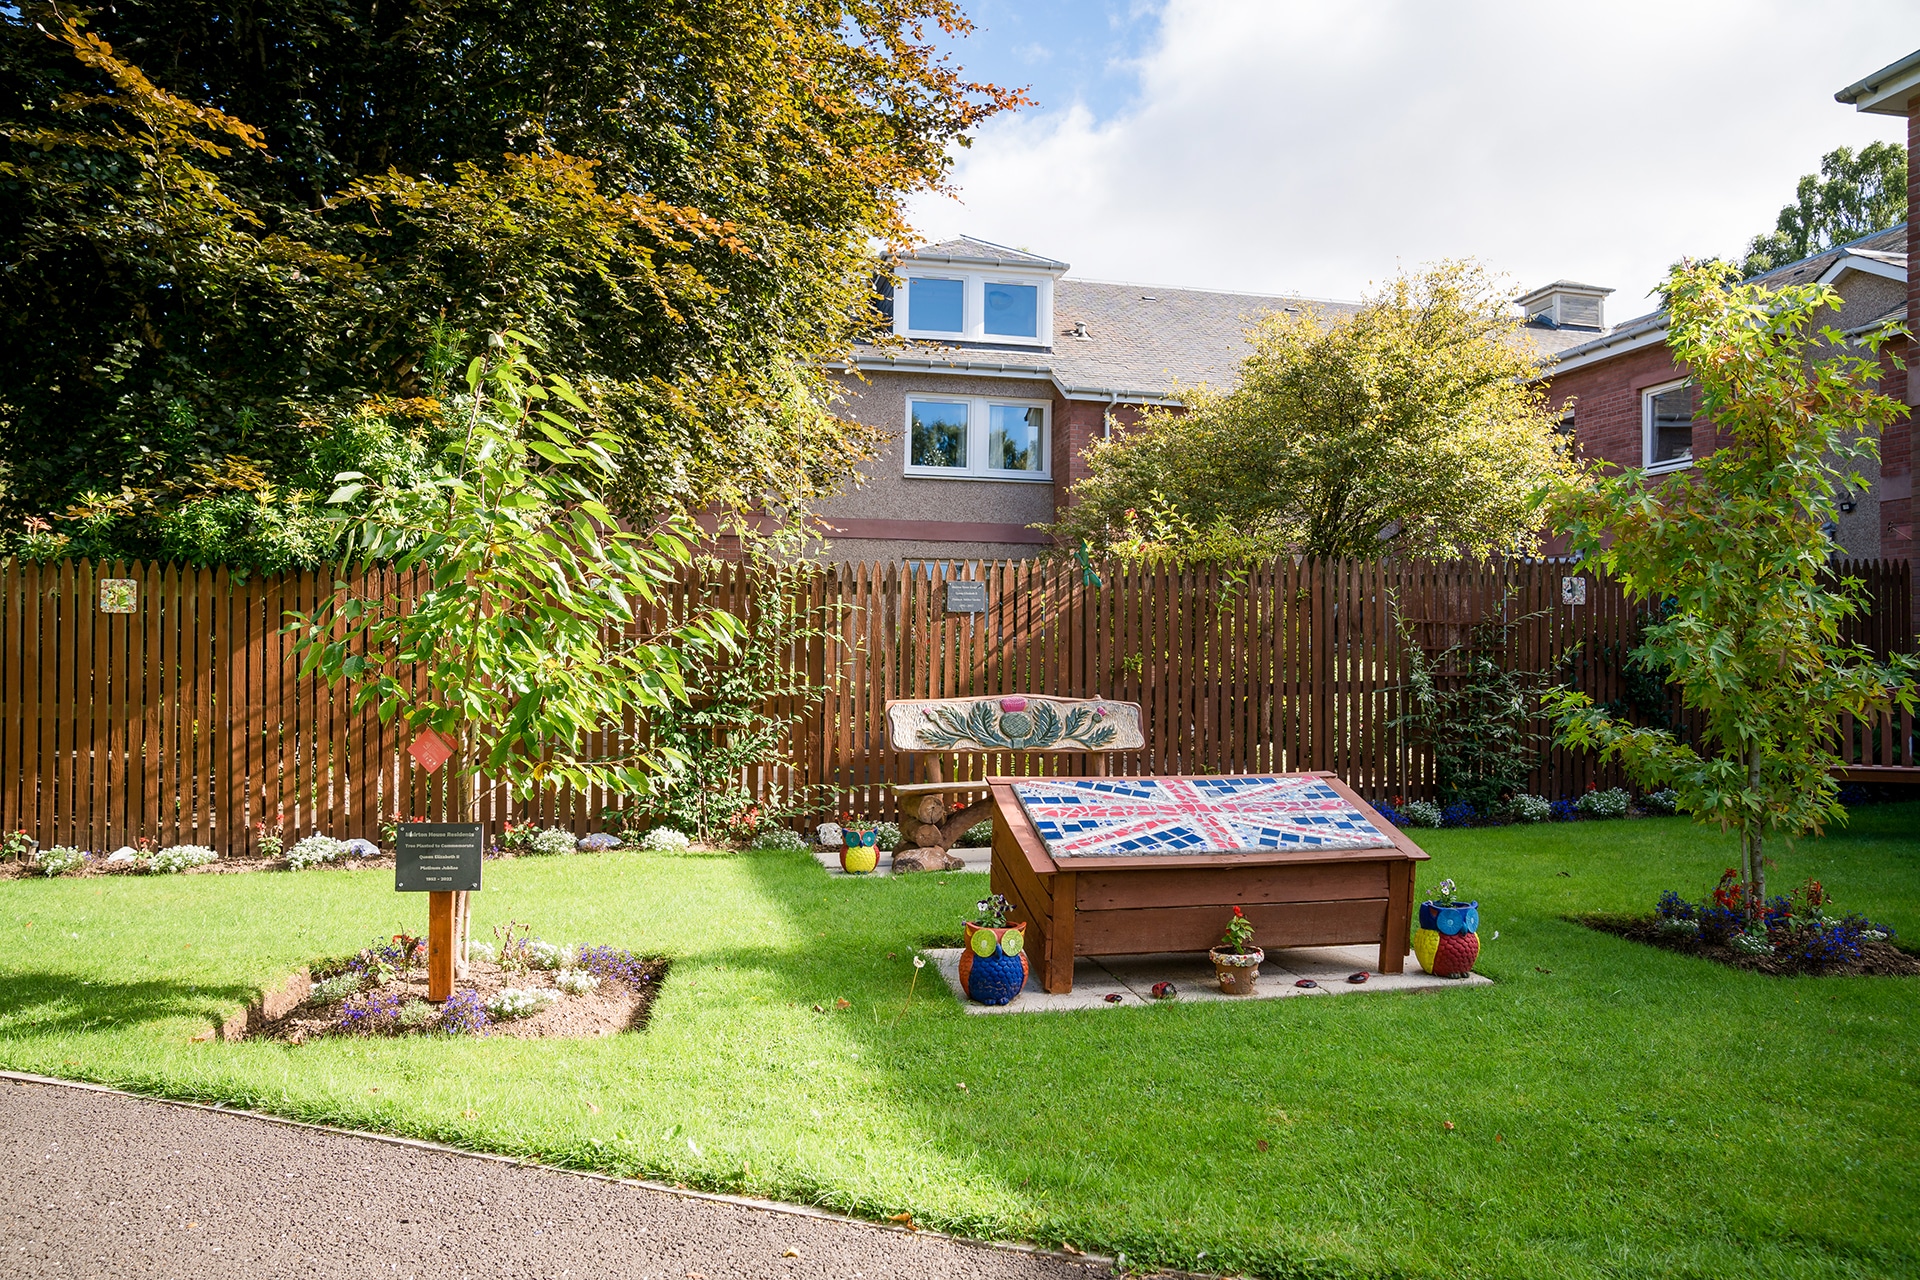 The Platinum Jubilee Garden at Muirton House Care Home featuring a Union Jack mural made by some of the homes residents and local arts groups.